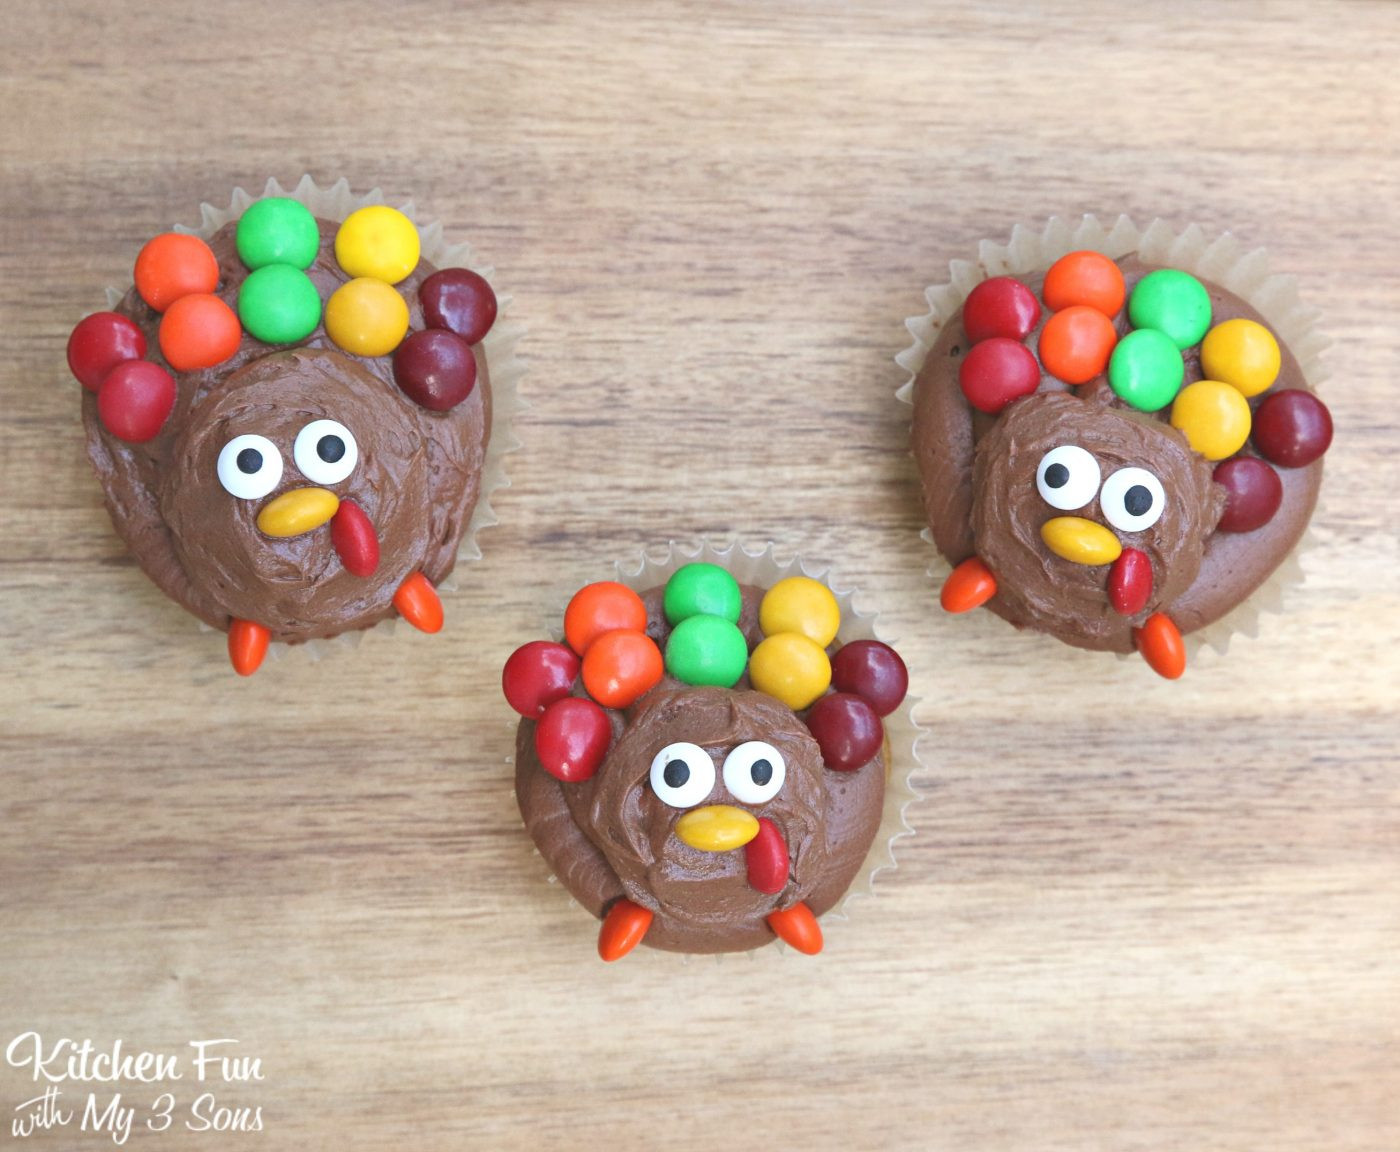 Easy Thanksgiving Turkey
 Turkey Cupcakes for Thanksgiving Kitchen Fun With My 3 Sons